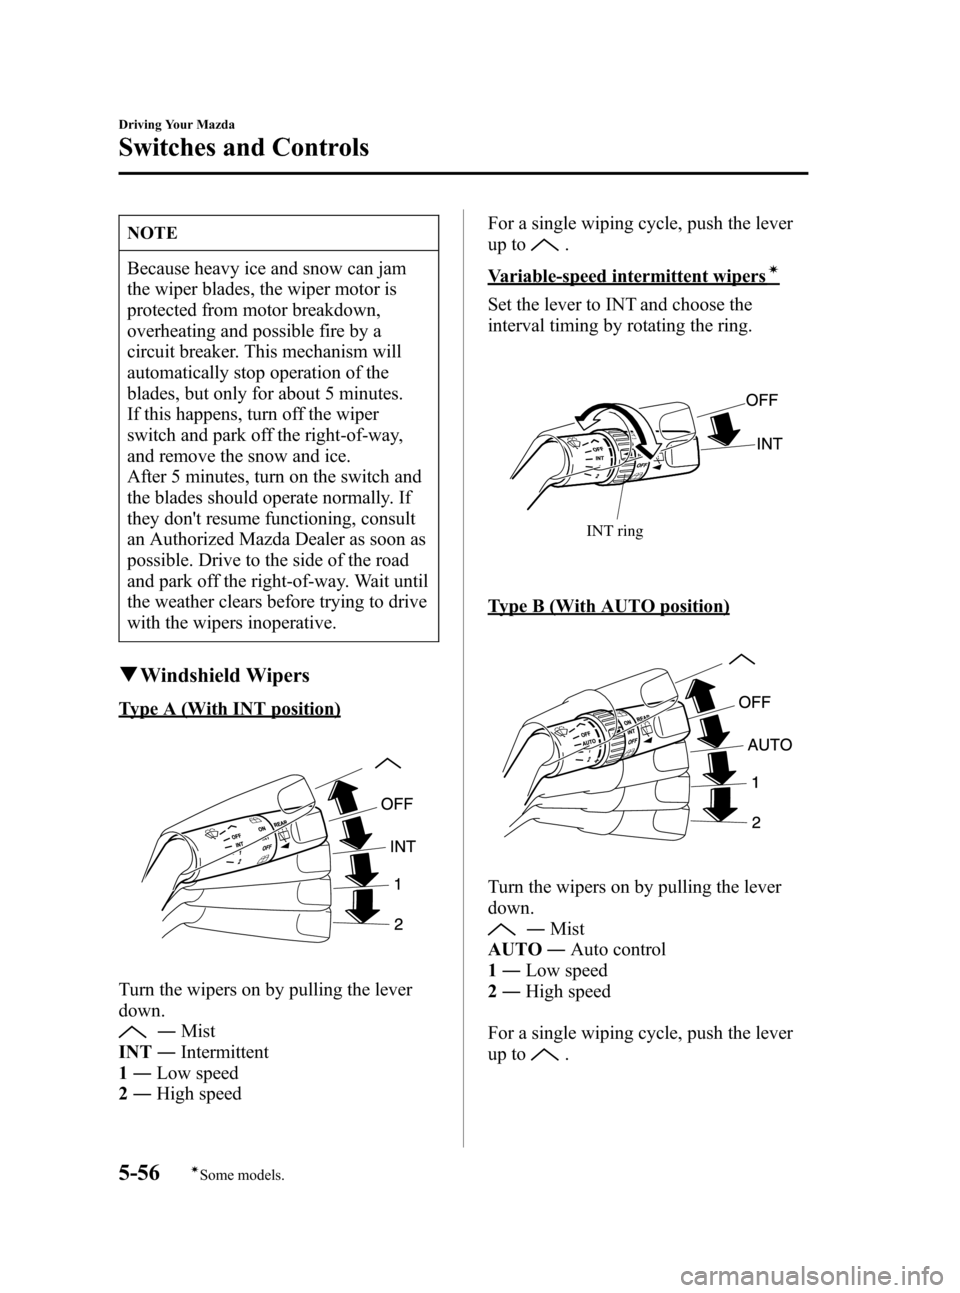 MAZDA MODEL 3 HATCHBACK 2007   (in English) User Guide Black plate (178,1)
NOTE
Because heavy ice and snow can jam
the wiper blades, the wiper motor is
protected from motor breakdown,
overheating and possible fire by a
circuit breaker. This mechanism will